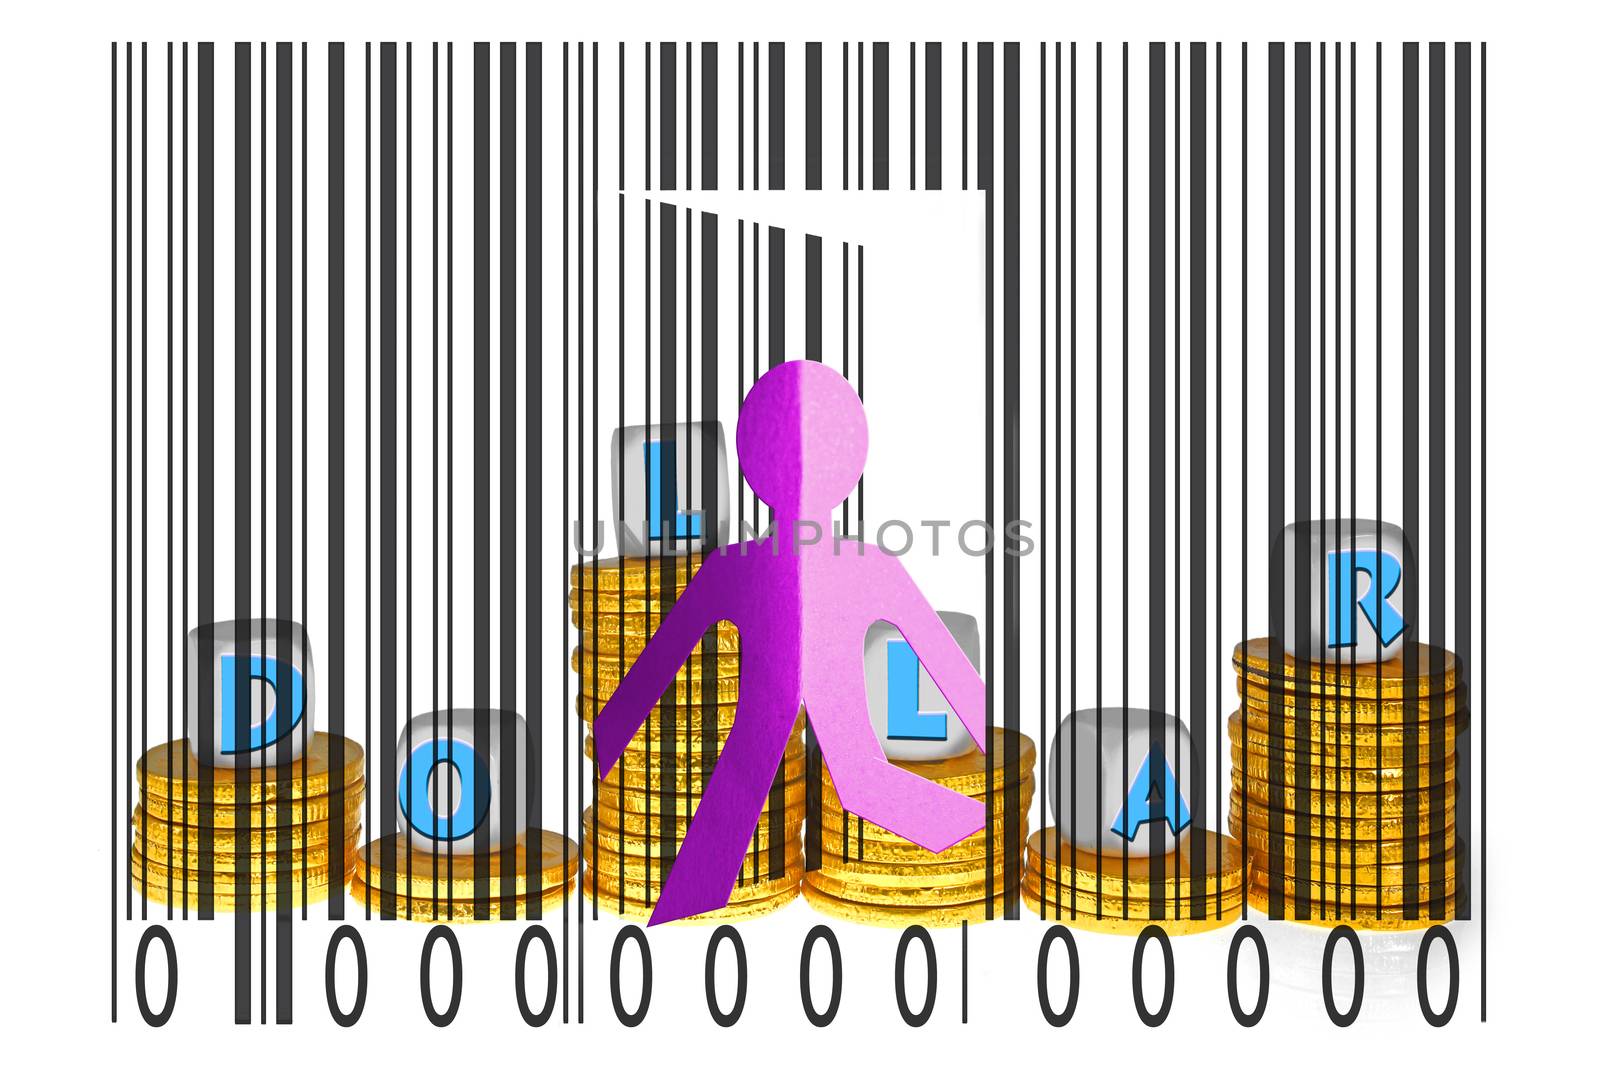 Paperman coming out of a bar code with Dollars word by yands